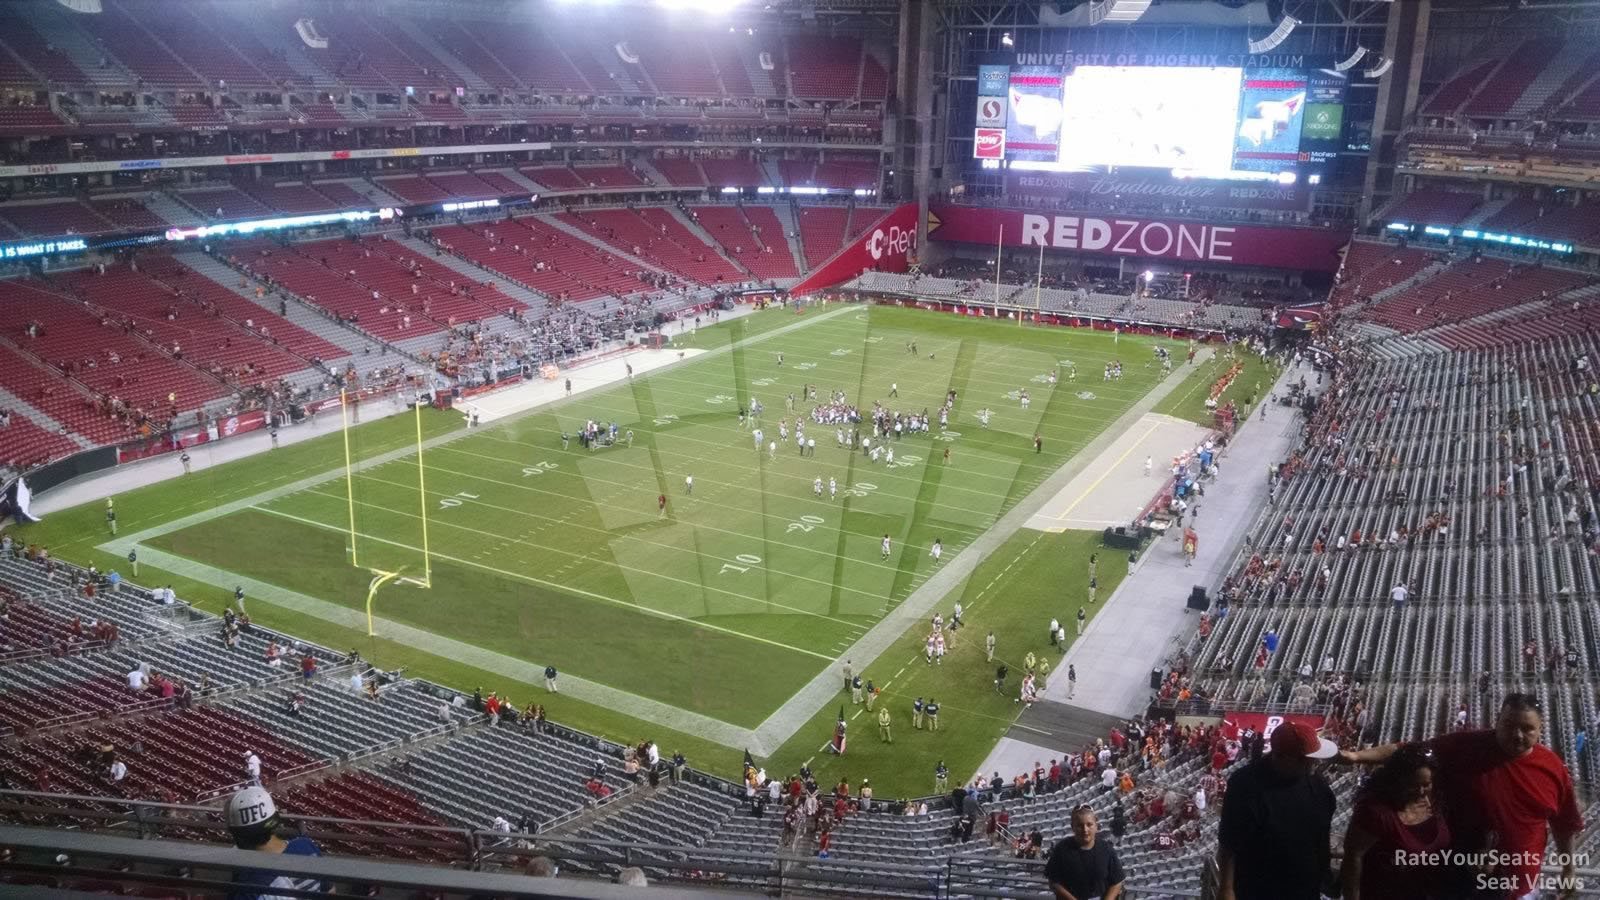 section 423, row 2 seat view  for football - state farm stadium